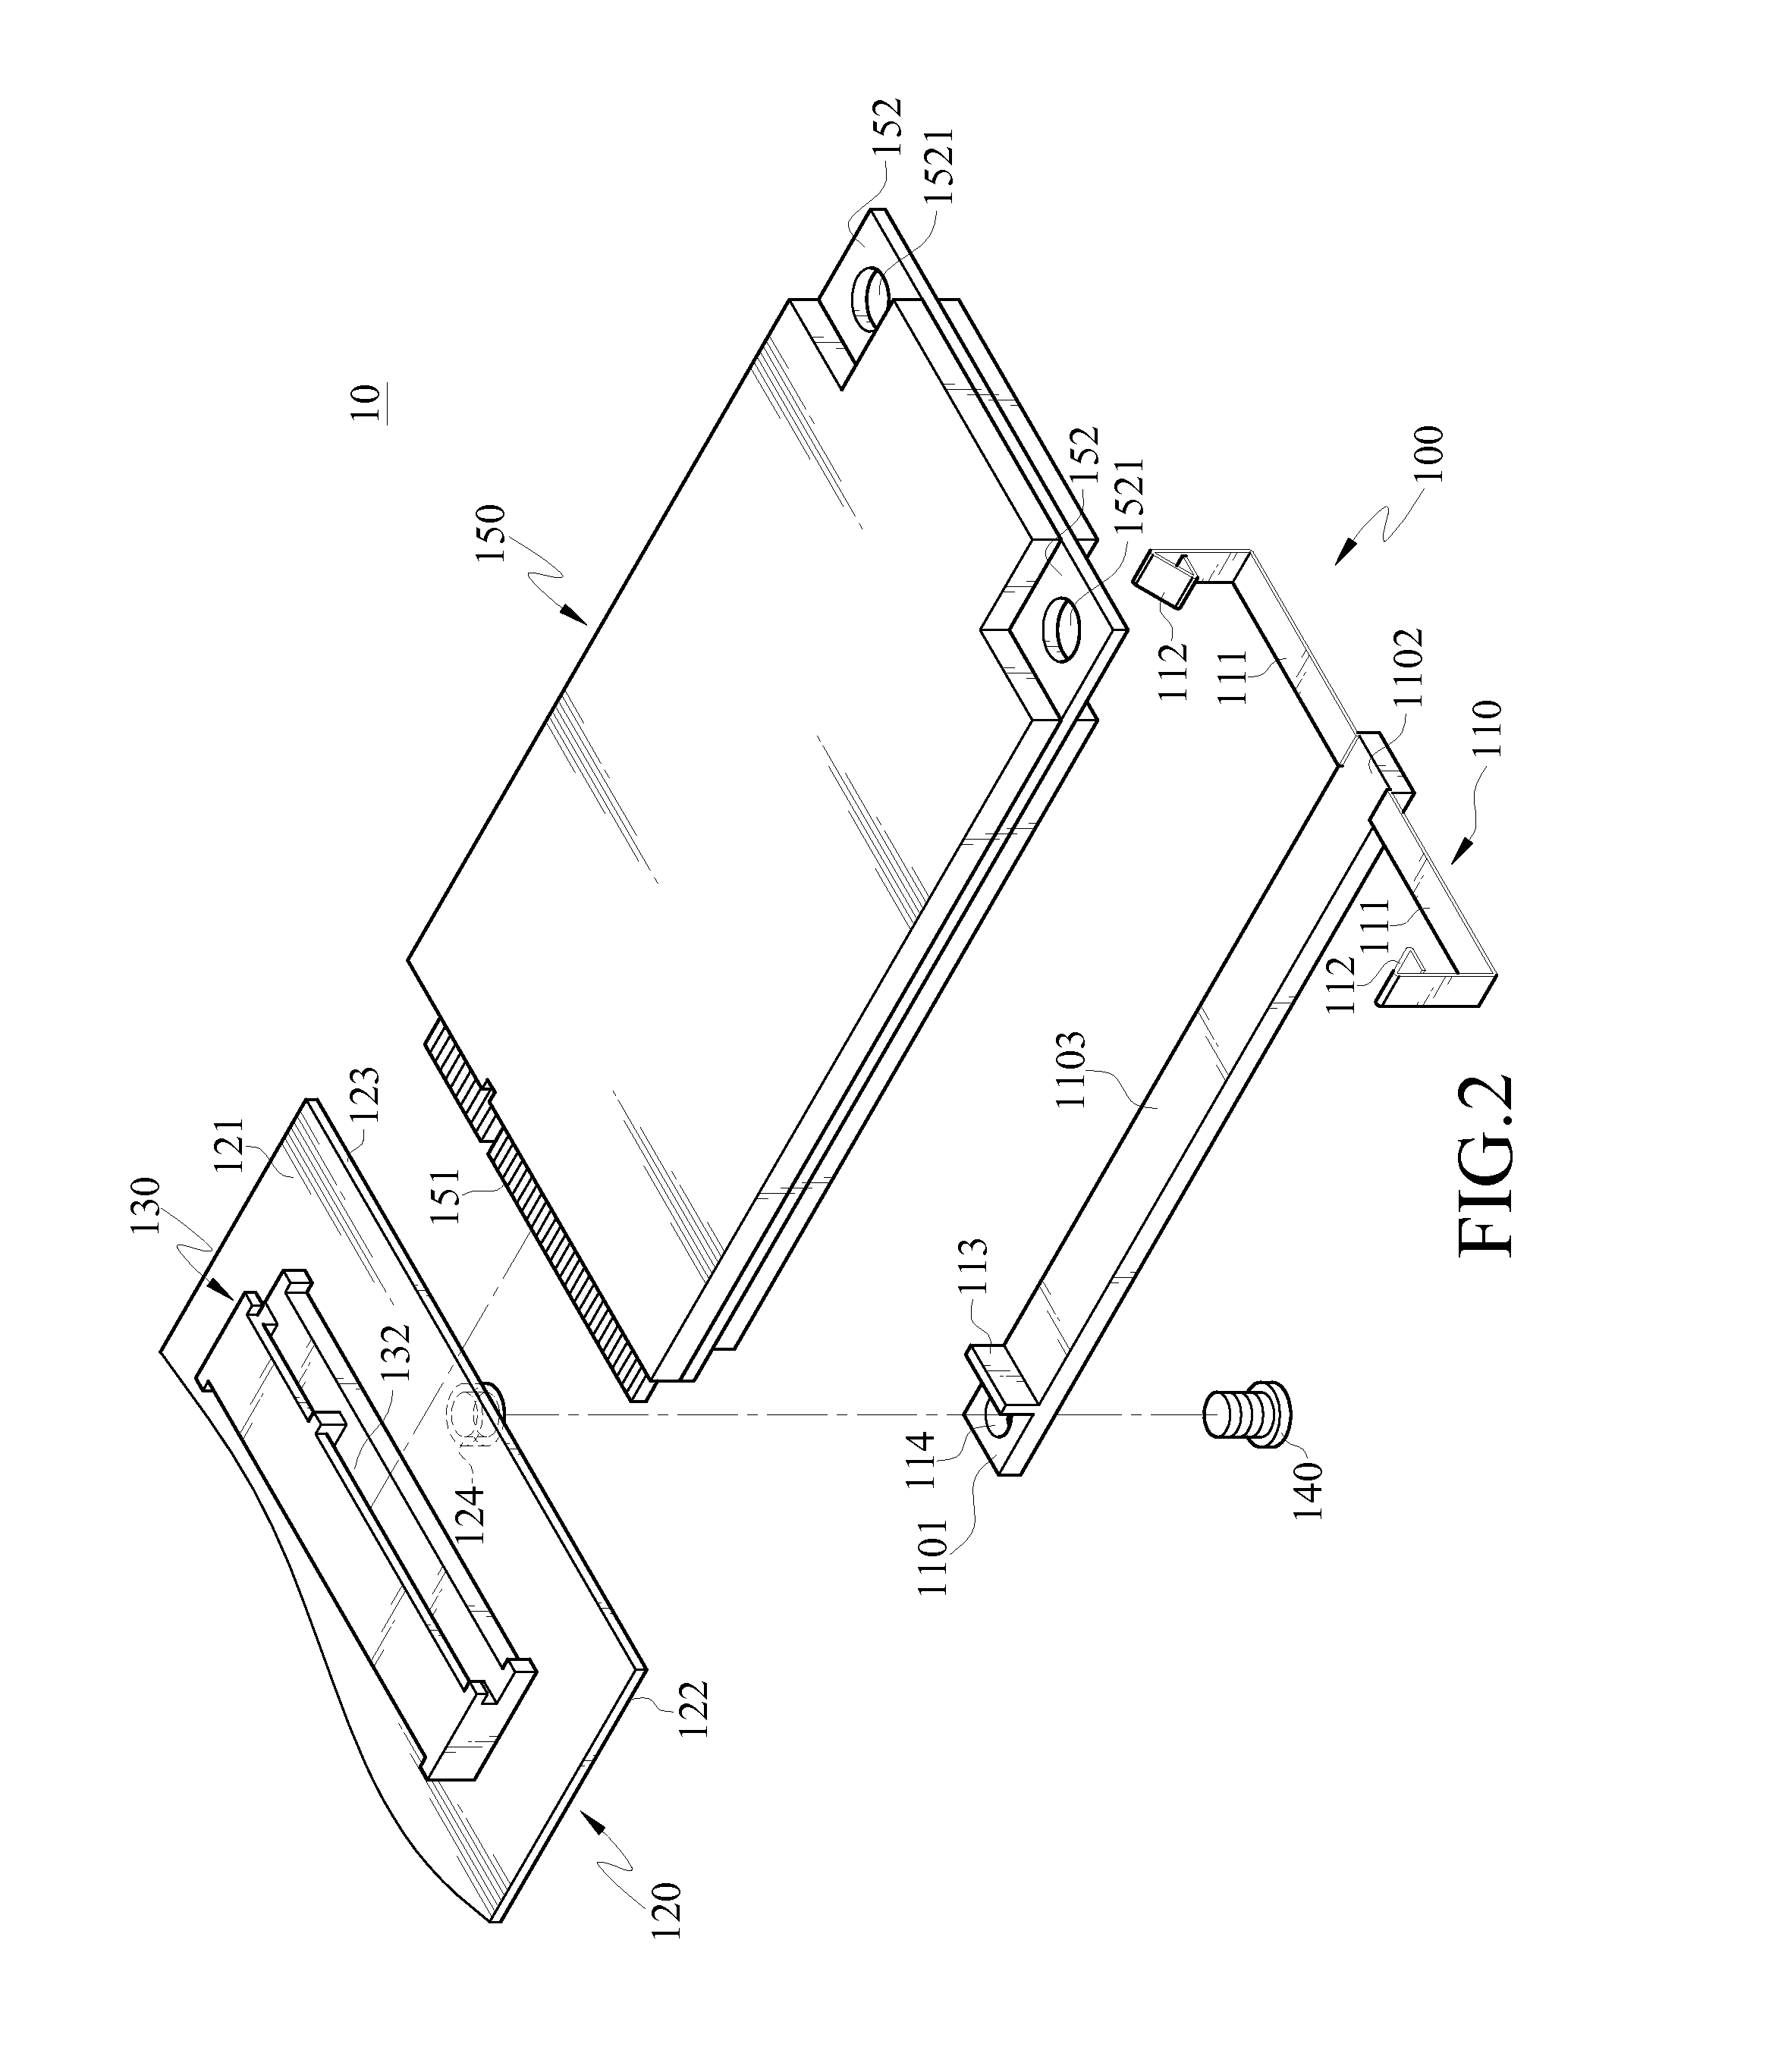 Fixing structure with interface card module and fixing structure thereof